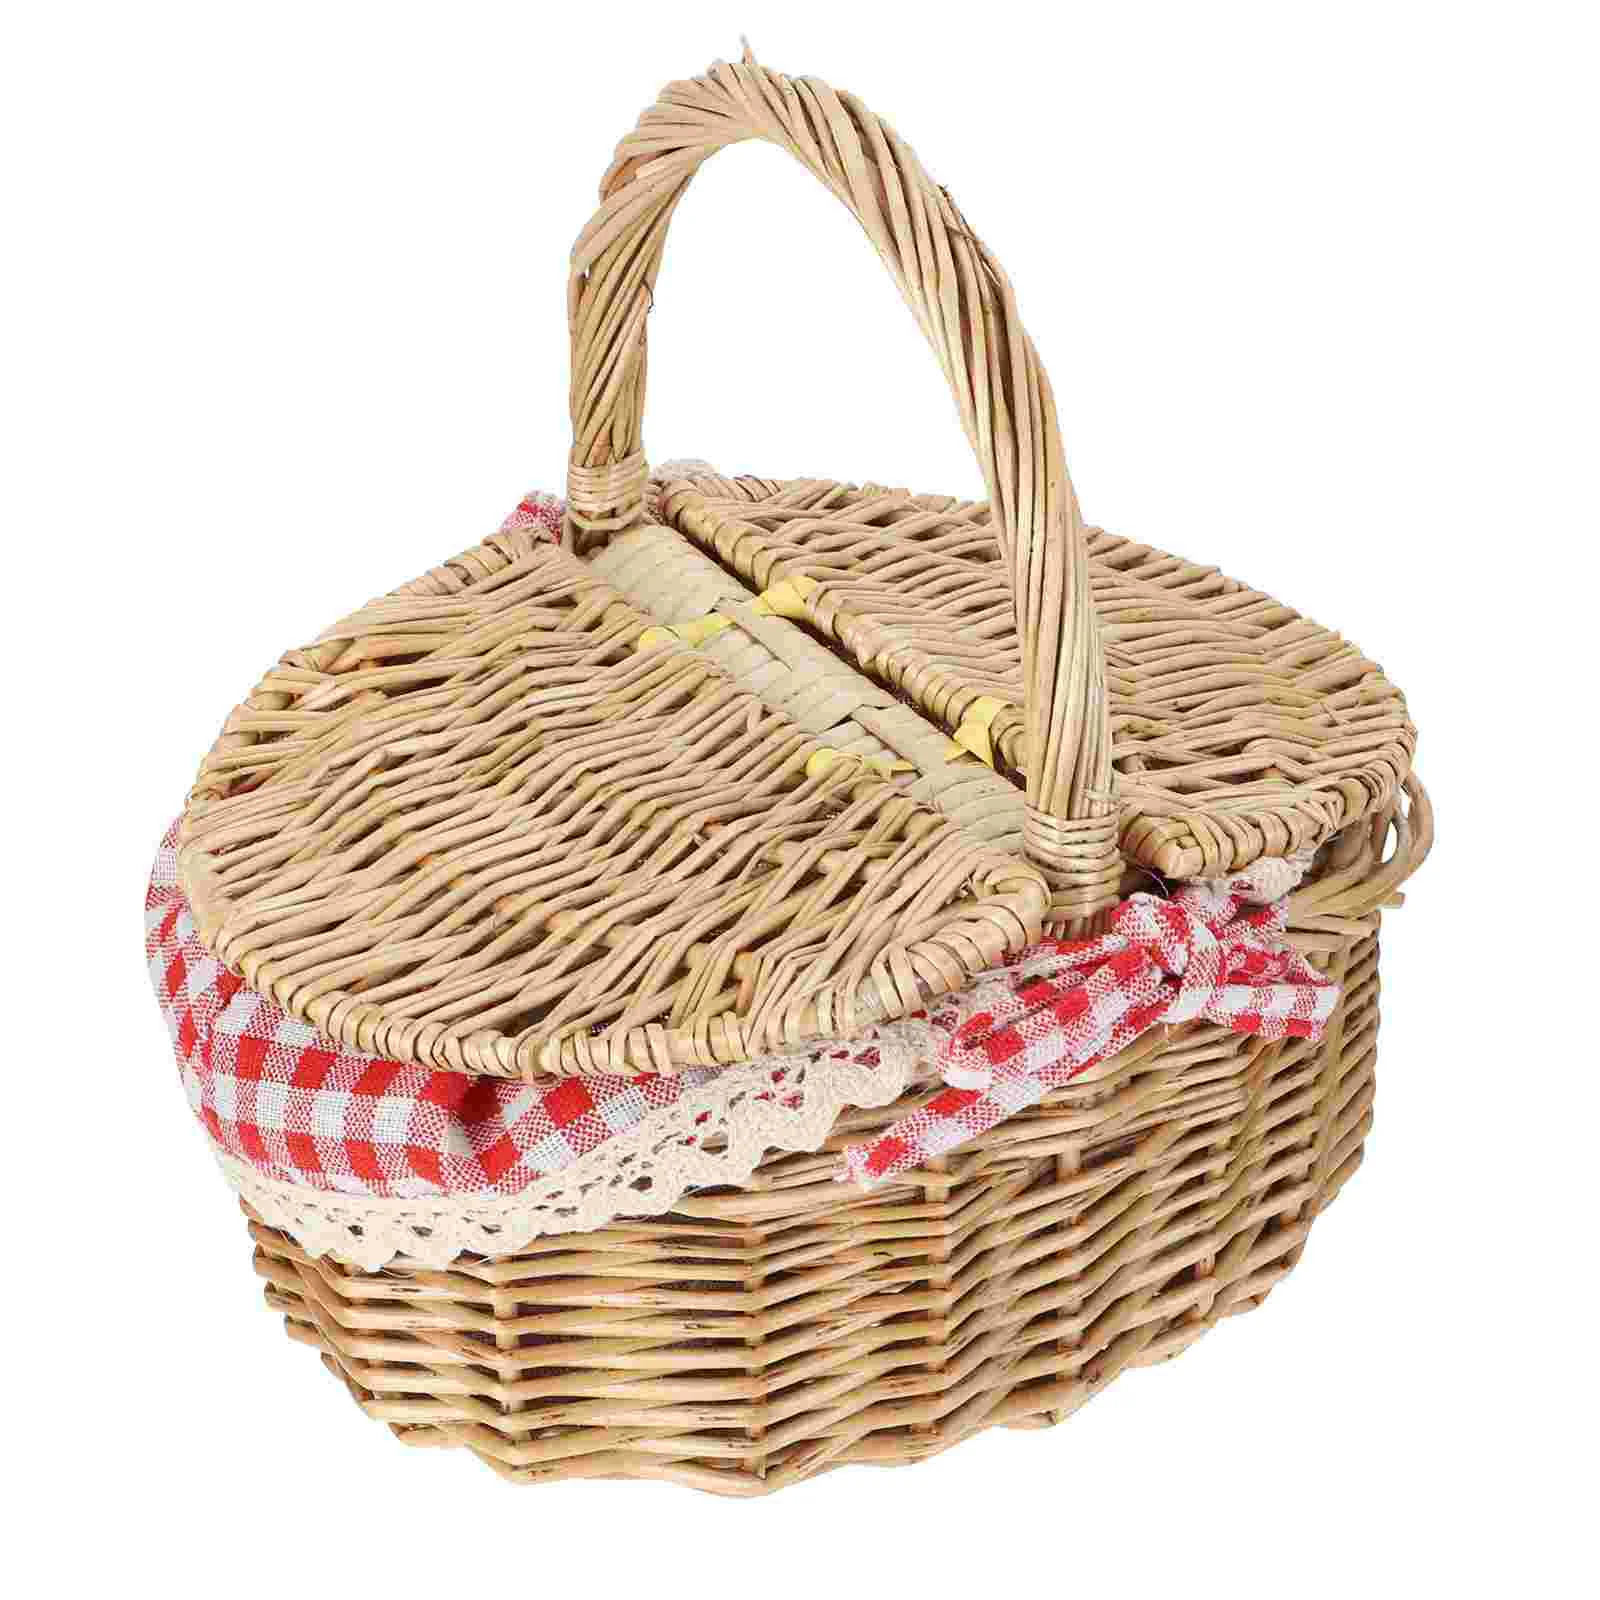 

Woven Storage Basket Storage Wicker Woven Picnic Flower Willow Woven Storage Baskets With For Bread Fruit Handles Handheld